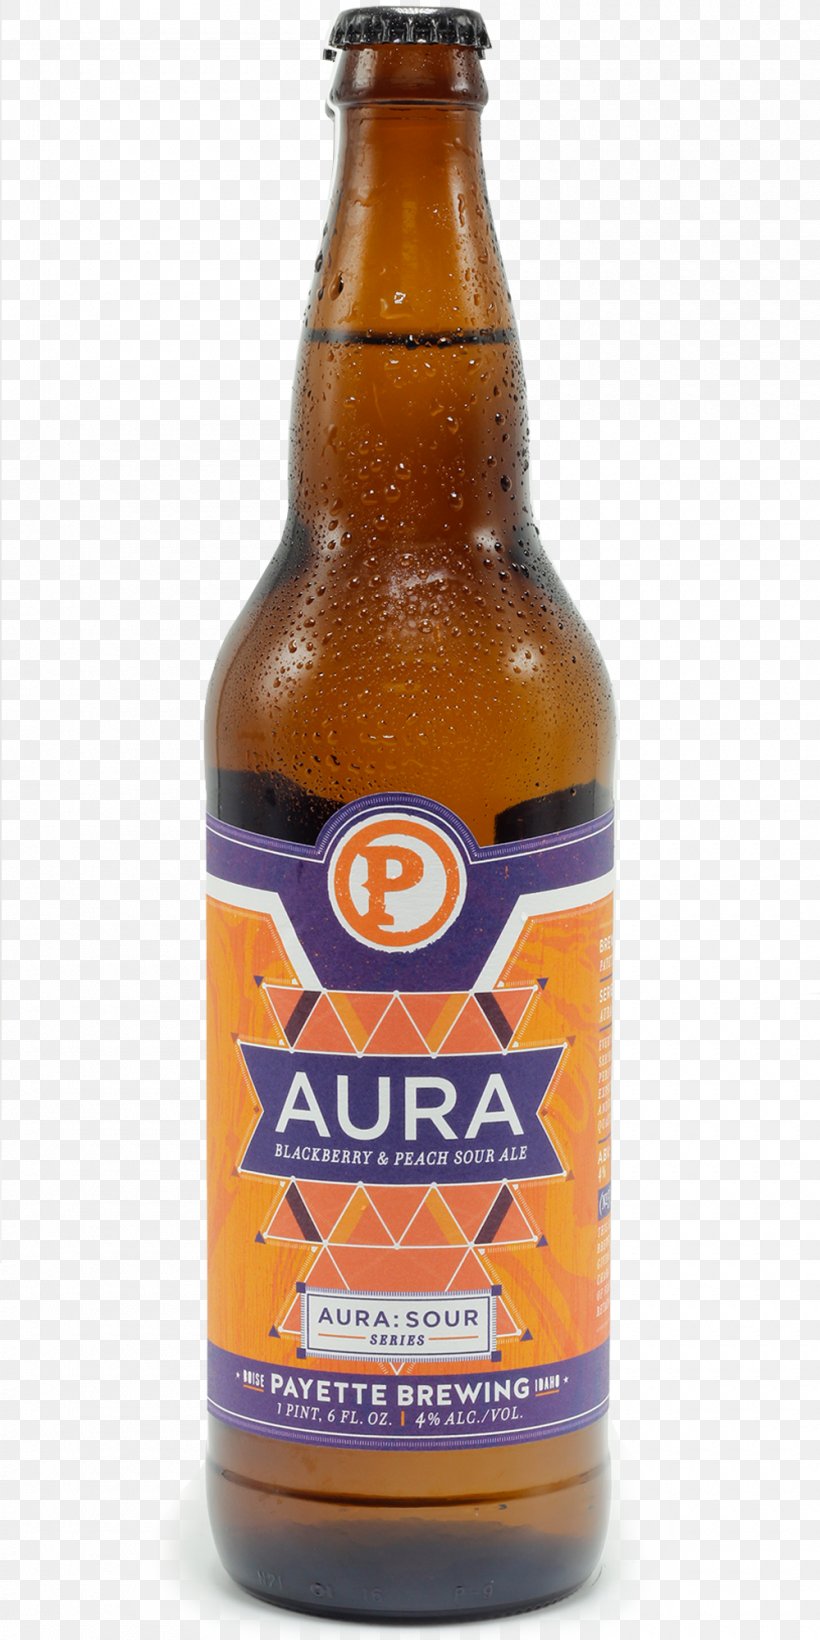 Lager Beer Bottle Wheat Beer India Pale Ale, PNG, 1000x2000px, Lager, Aura, Beer, Beer Bottle, Beer Brewing Grains Malts Download Free